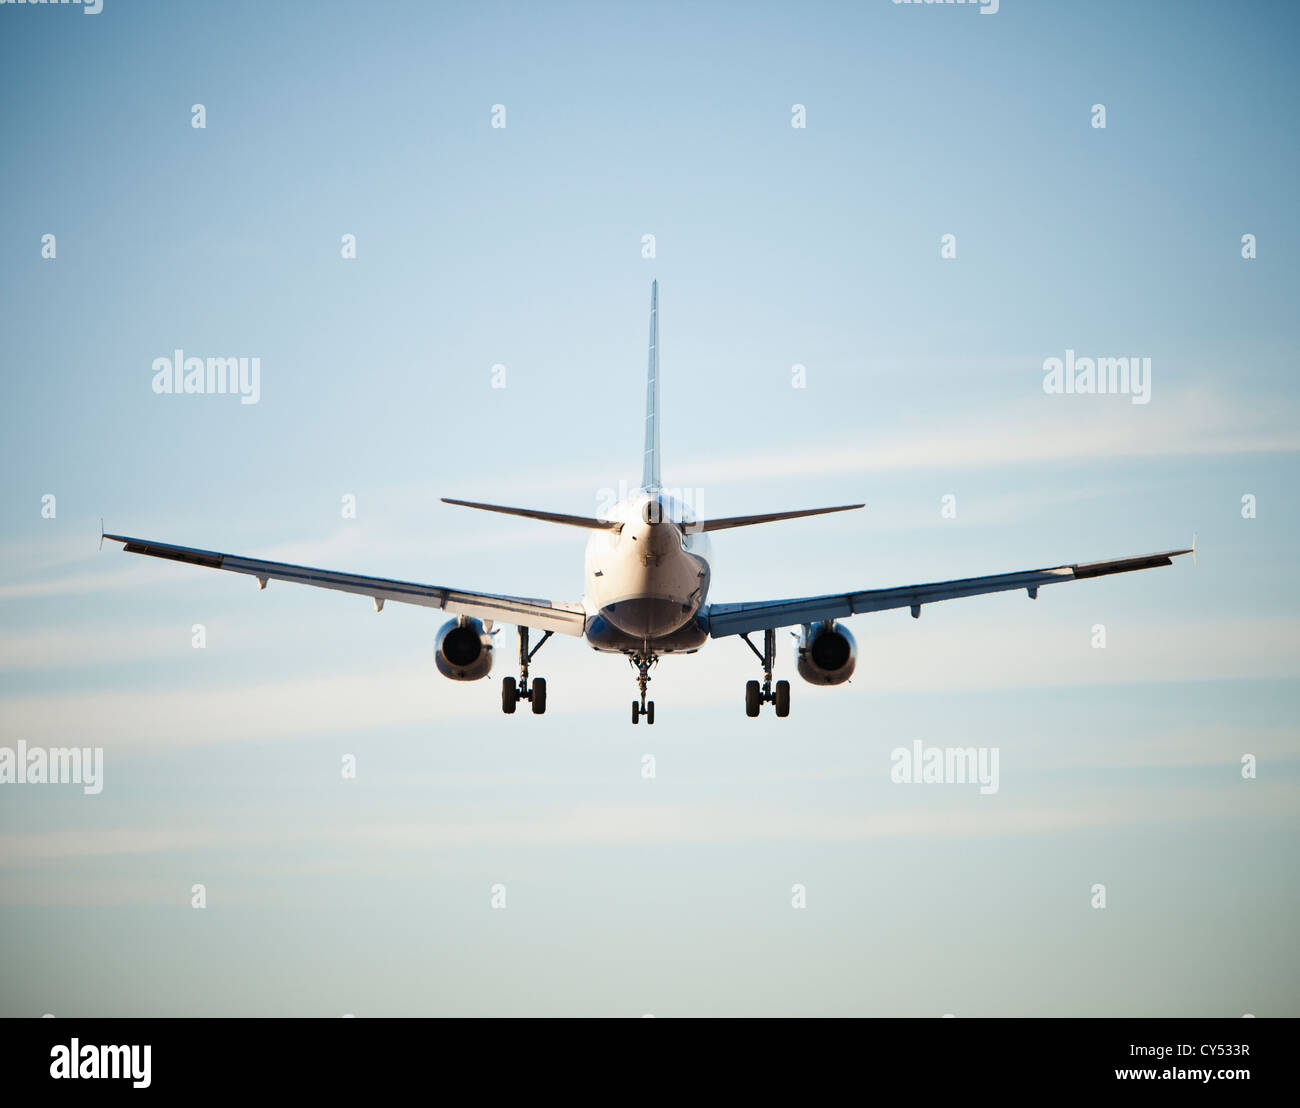 Tale end of jet airliner flying Stock Photo